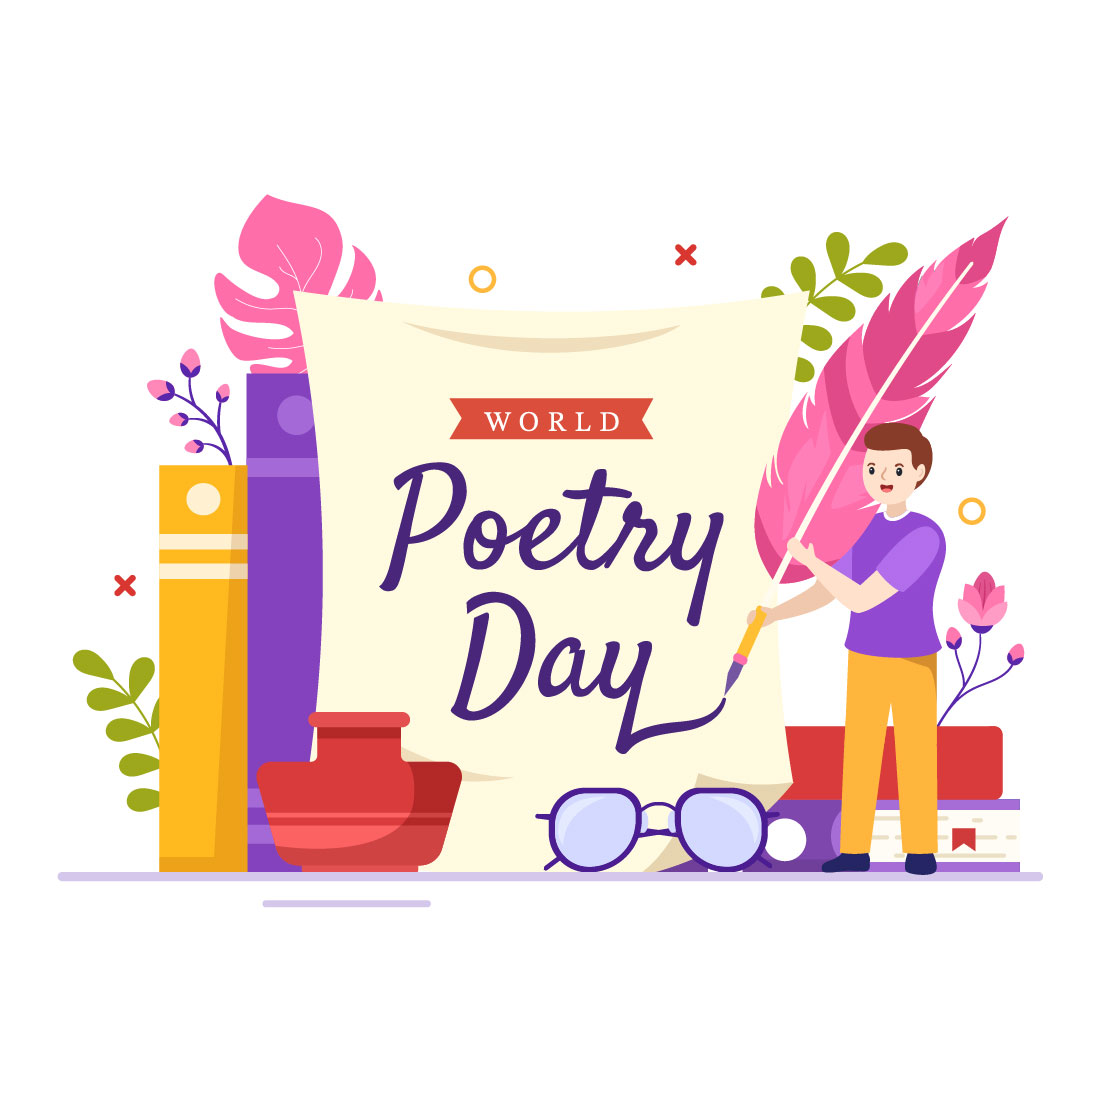 15 World Poetry Day Illustration cover image.